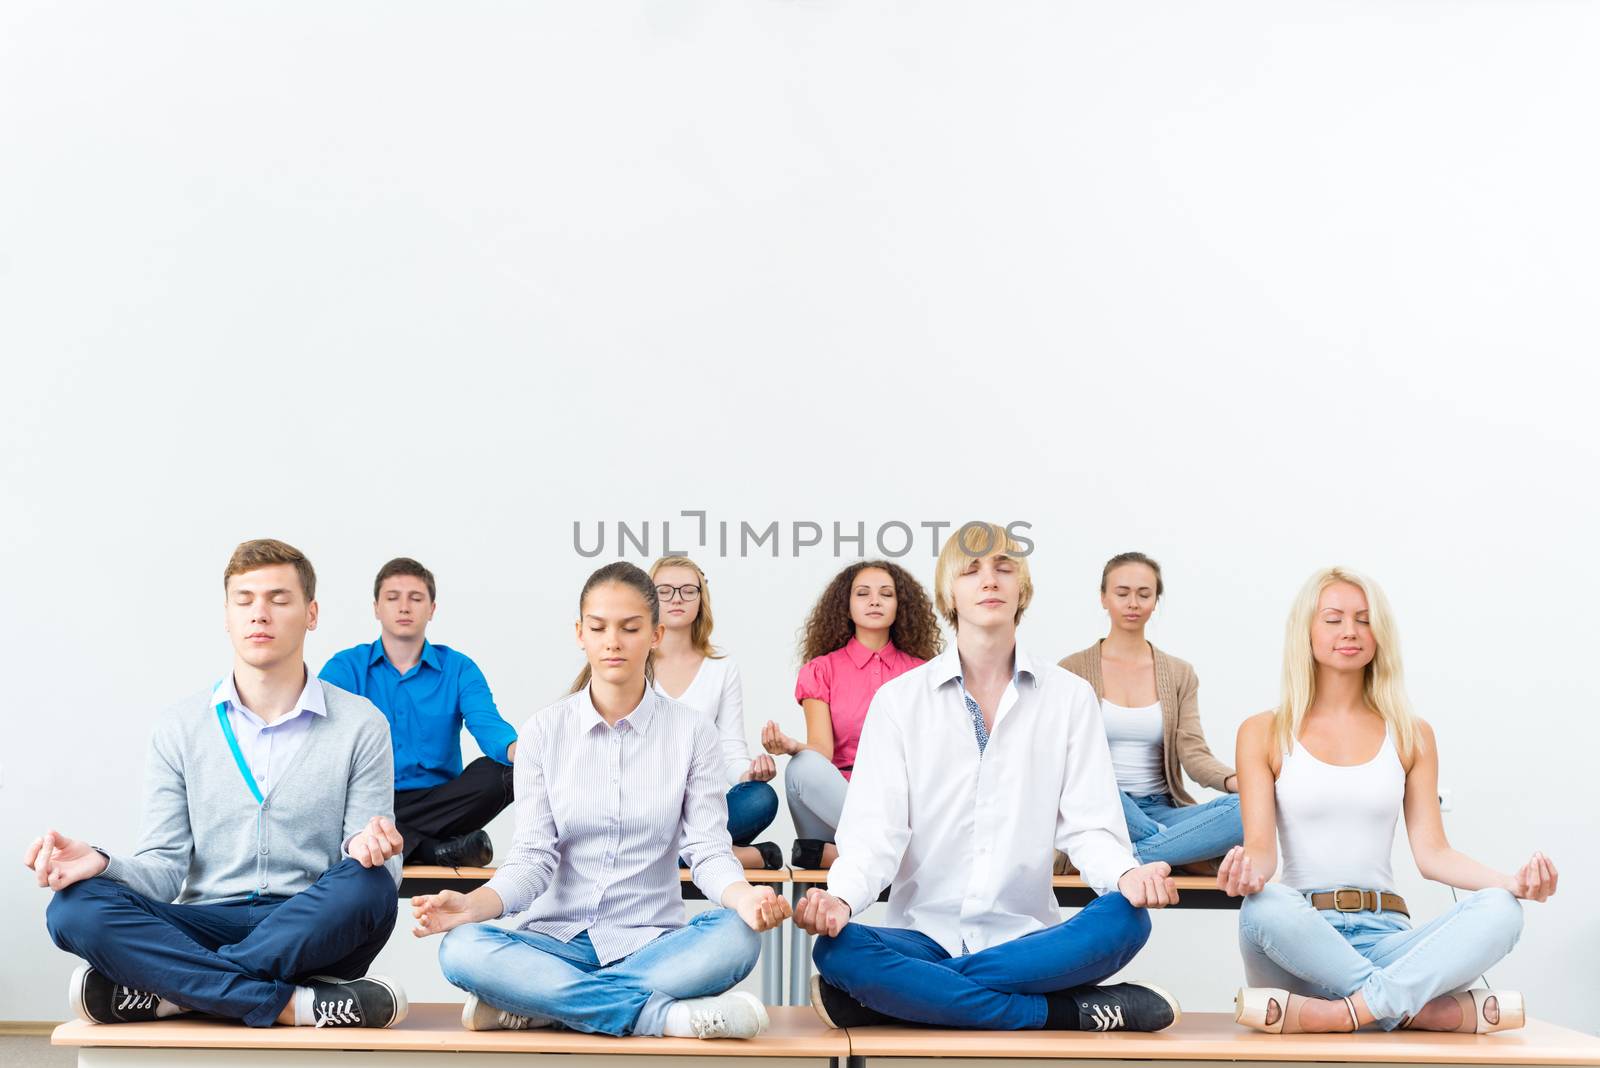 group of young people meditating in office at desk, group meditation